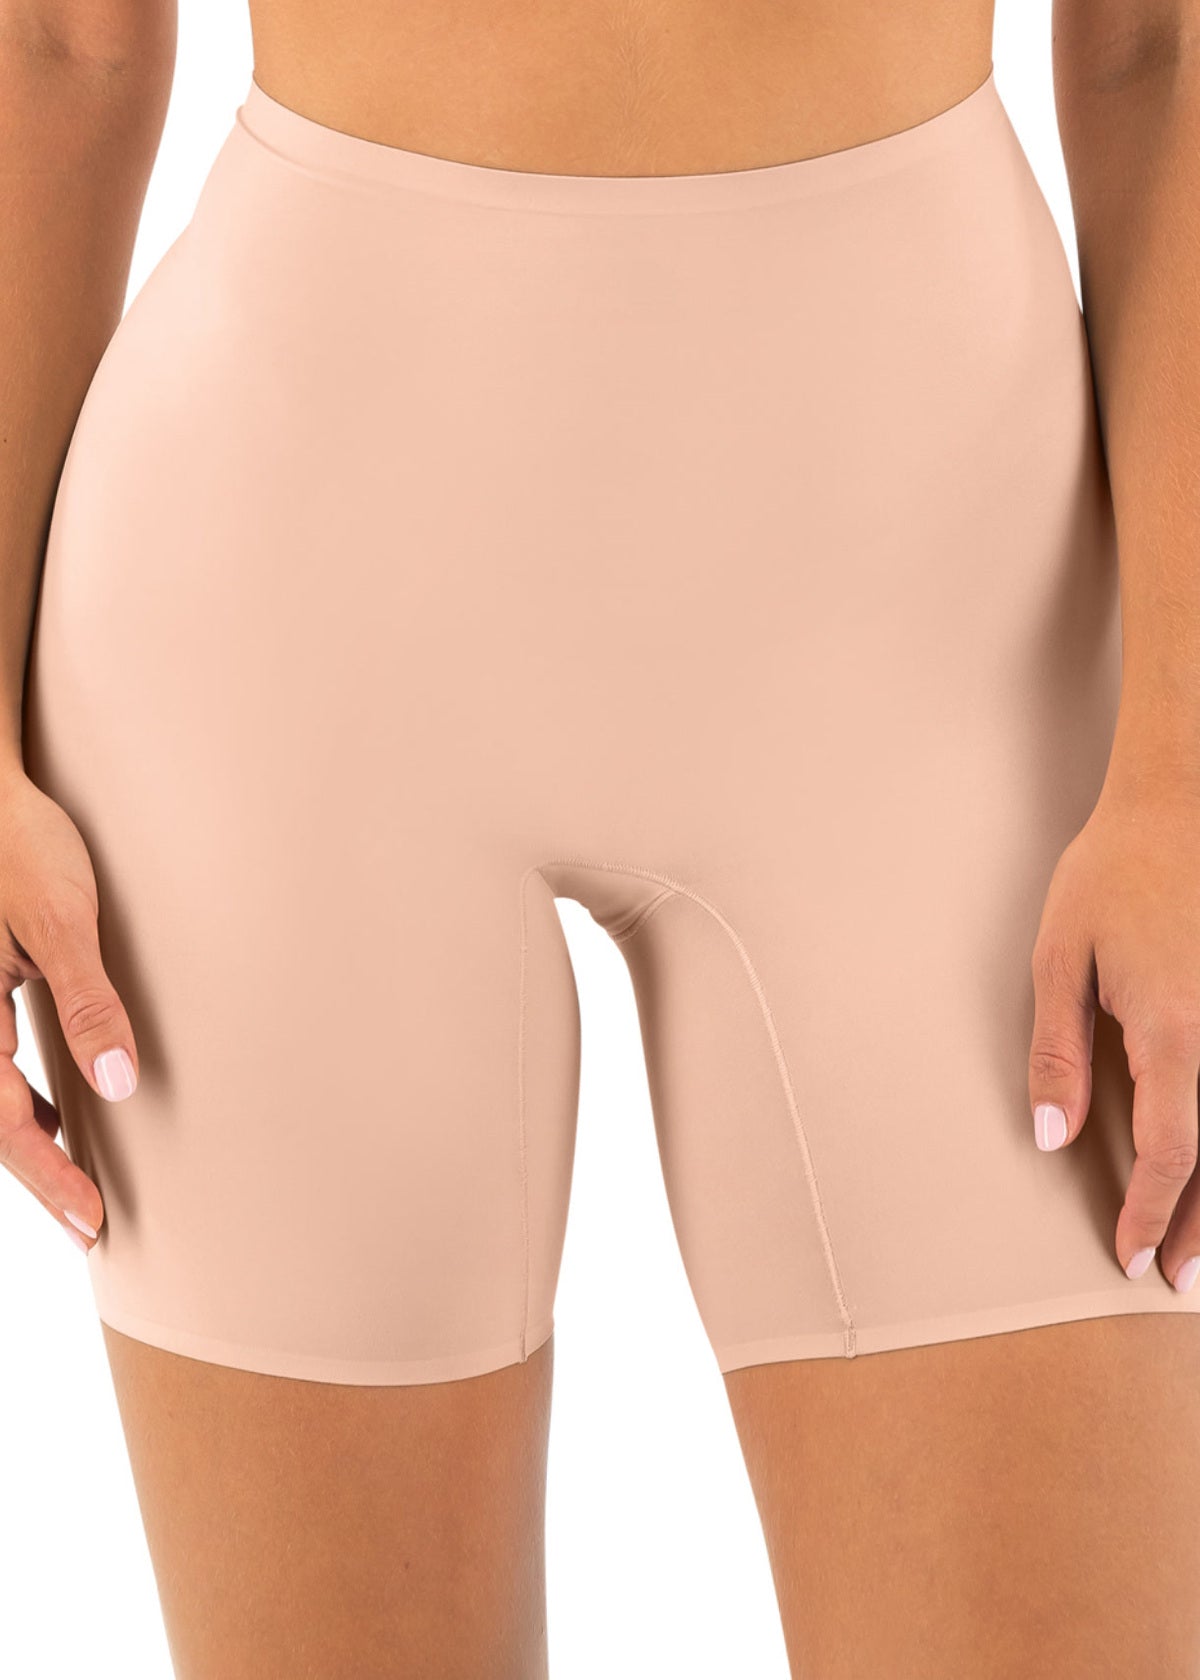 Fantasie: Smoothease Invisible Stretch Full Brief Natural Beige